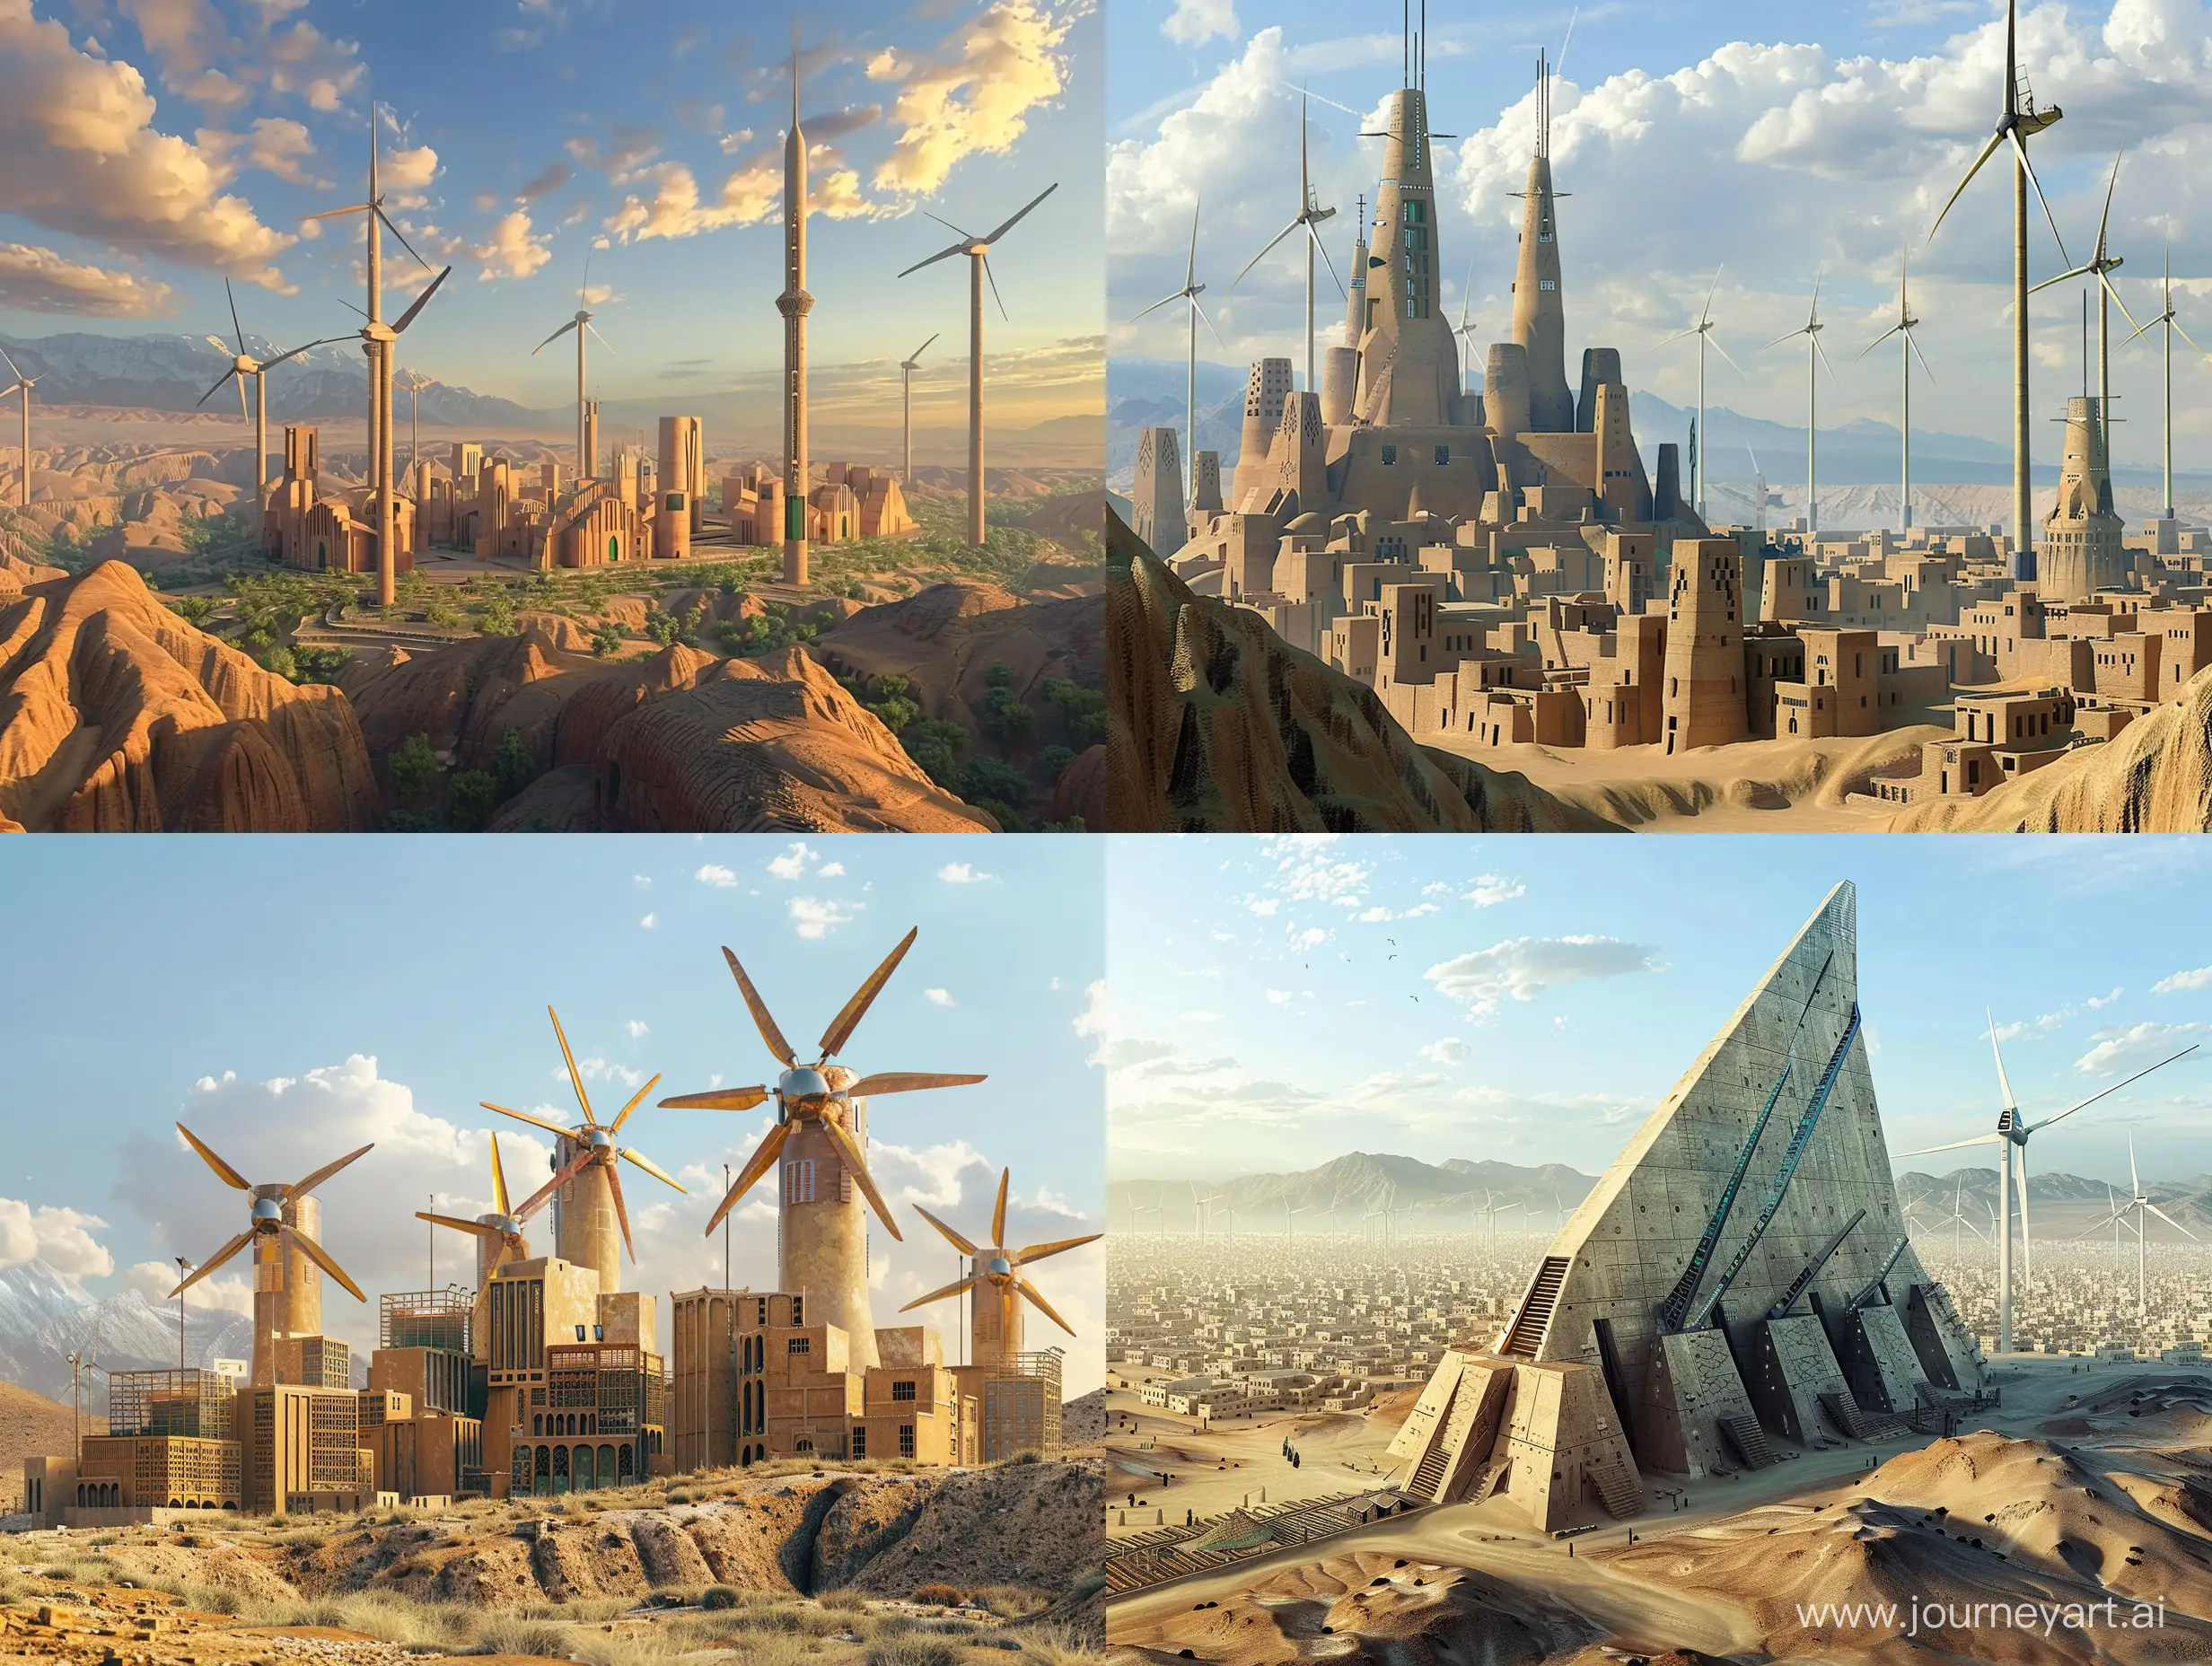 An image of the city of Yazd in the future and modern windmills is a very realistic image